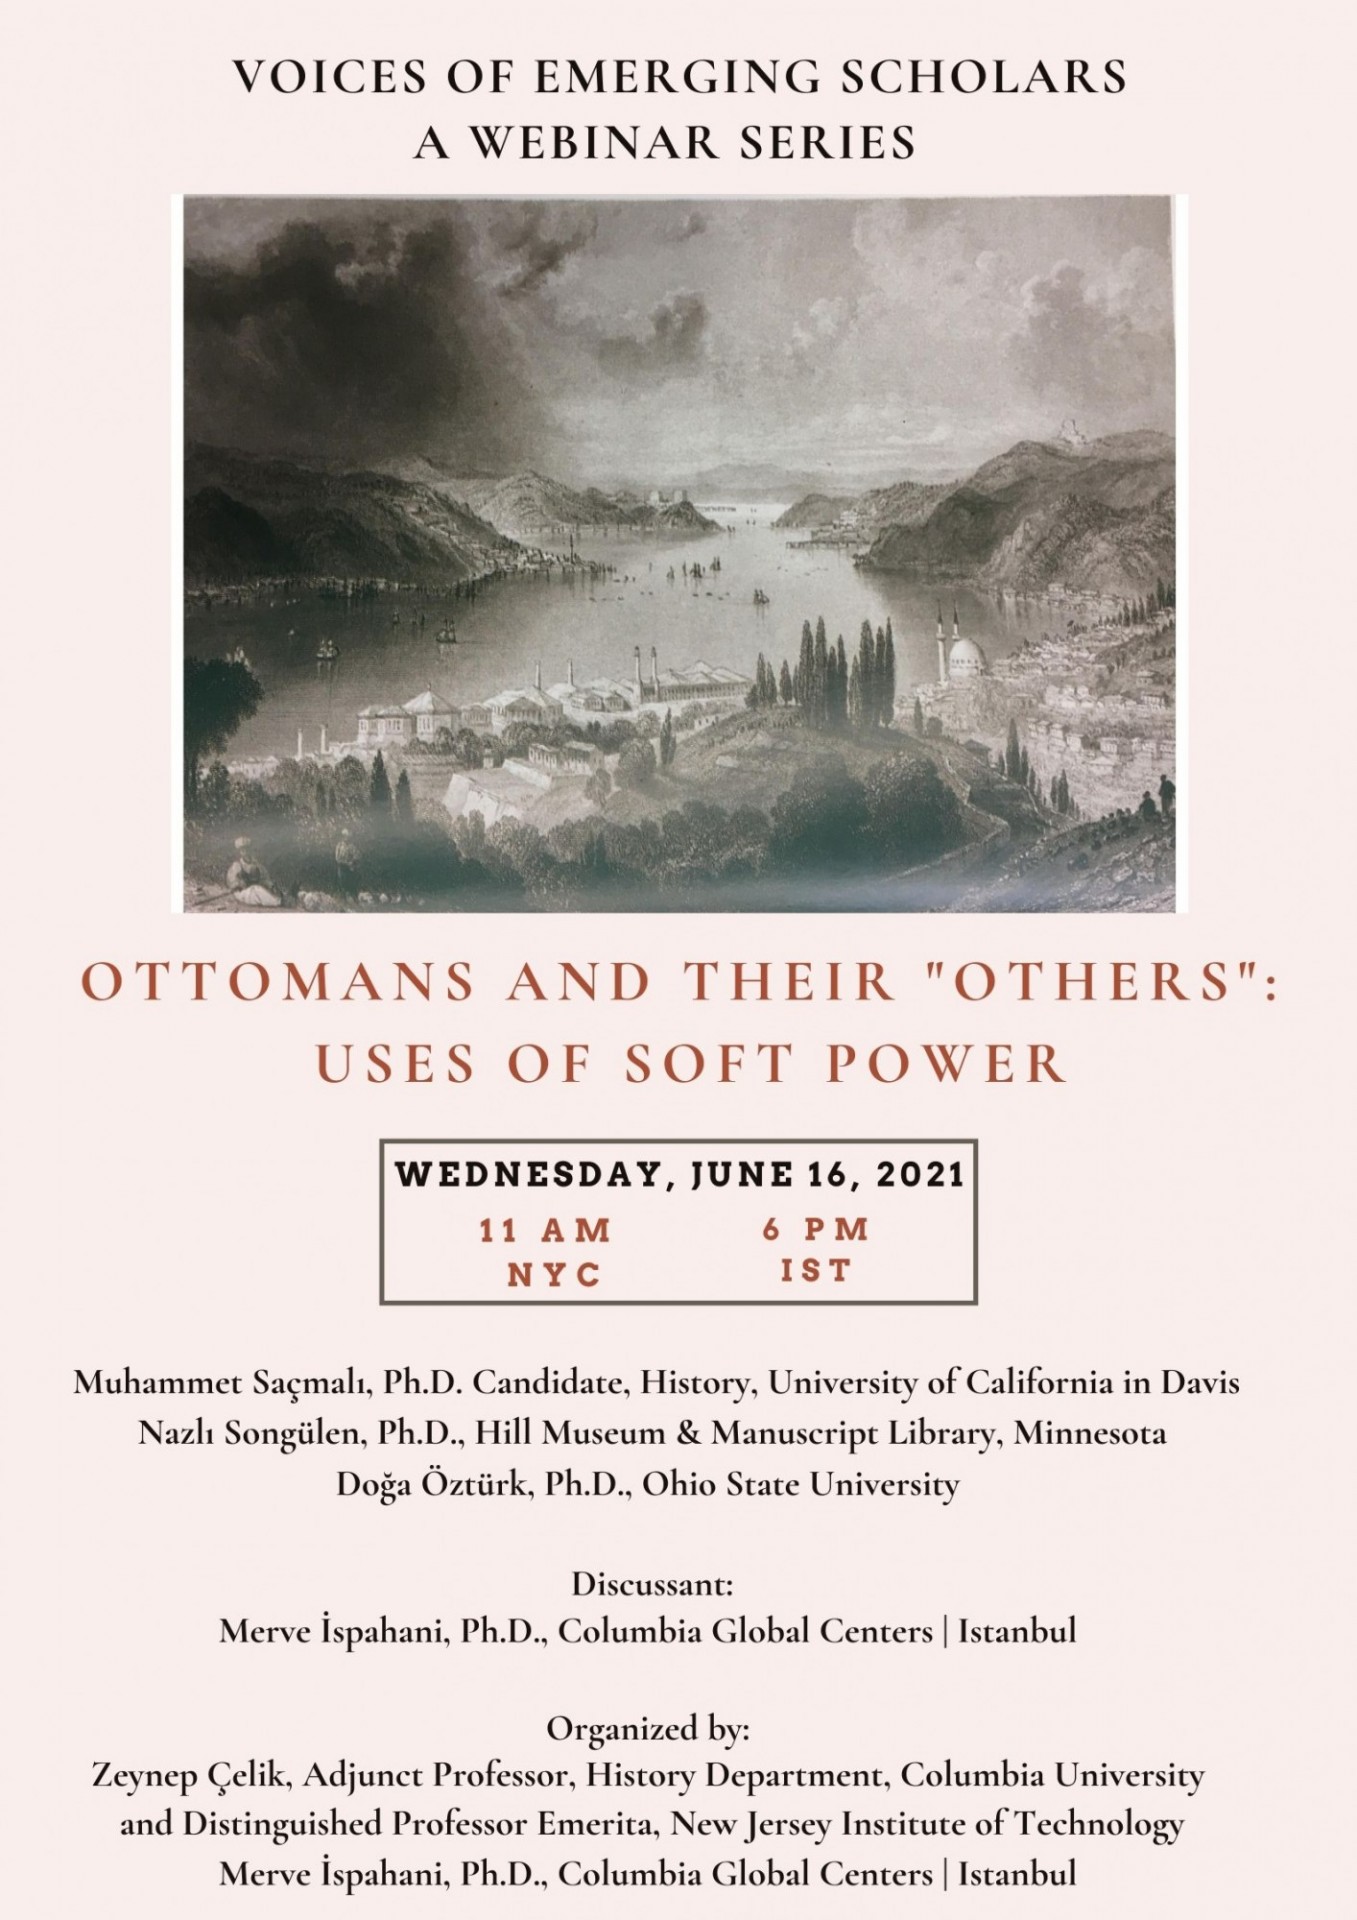 Ottomans and their "Others": Uses of Soft Power